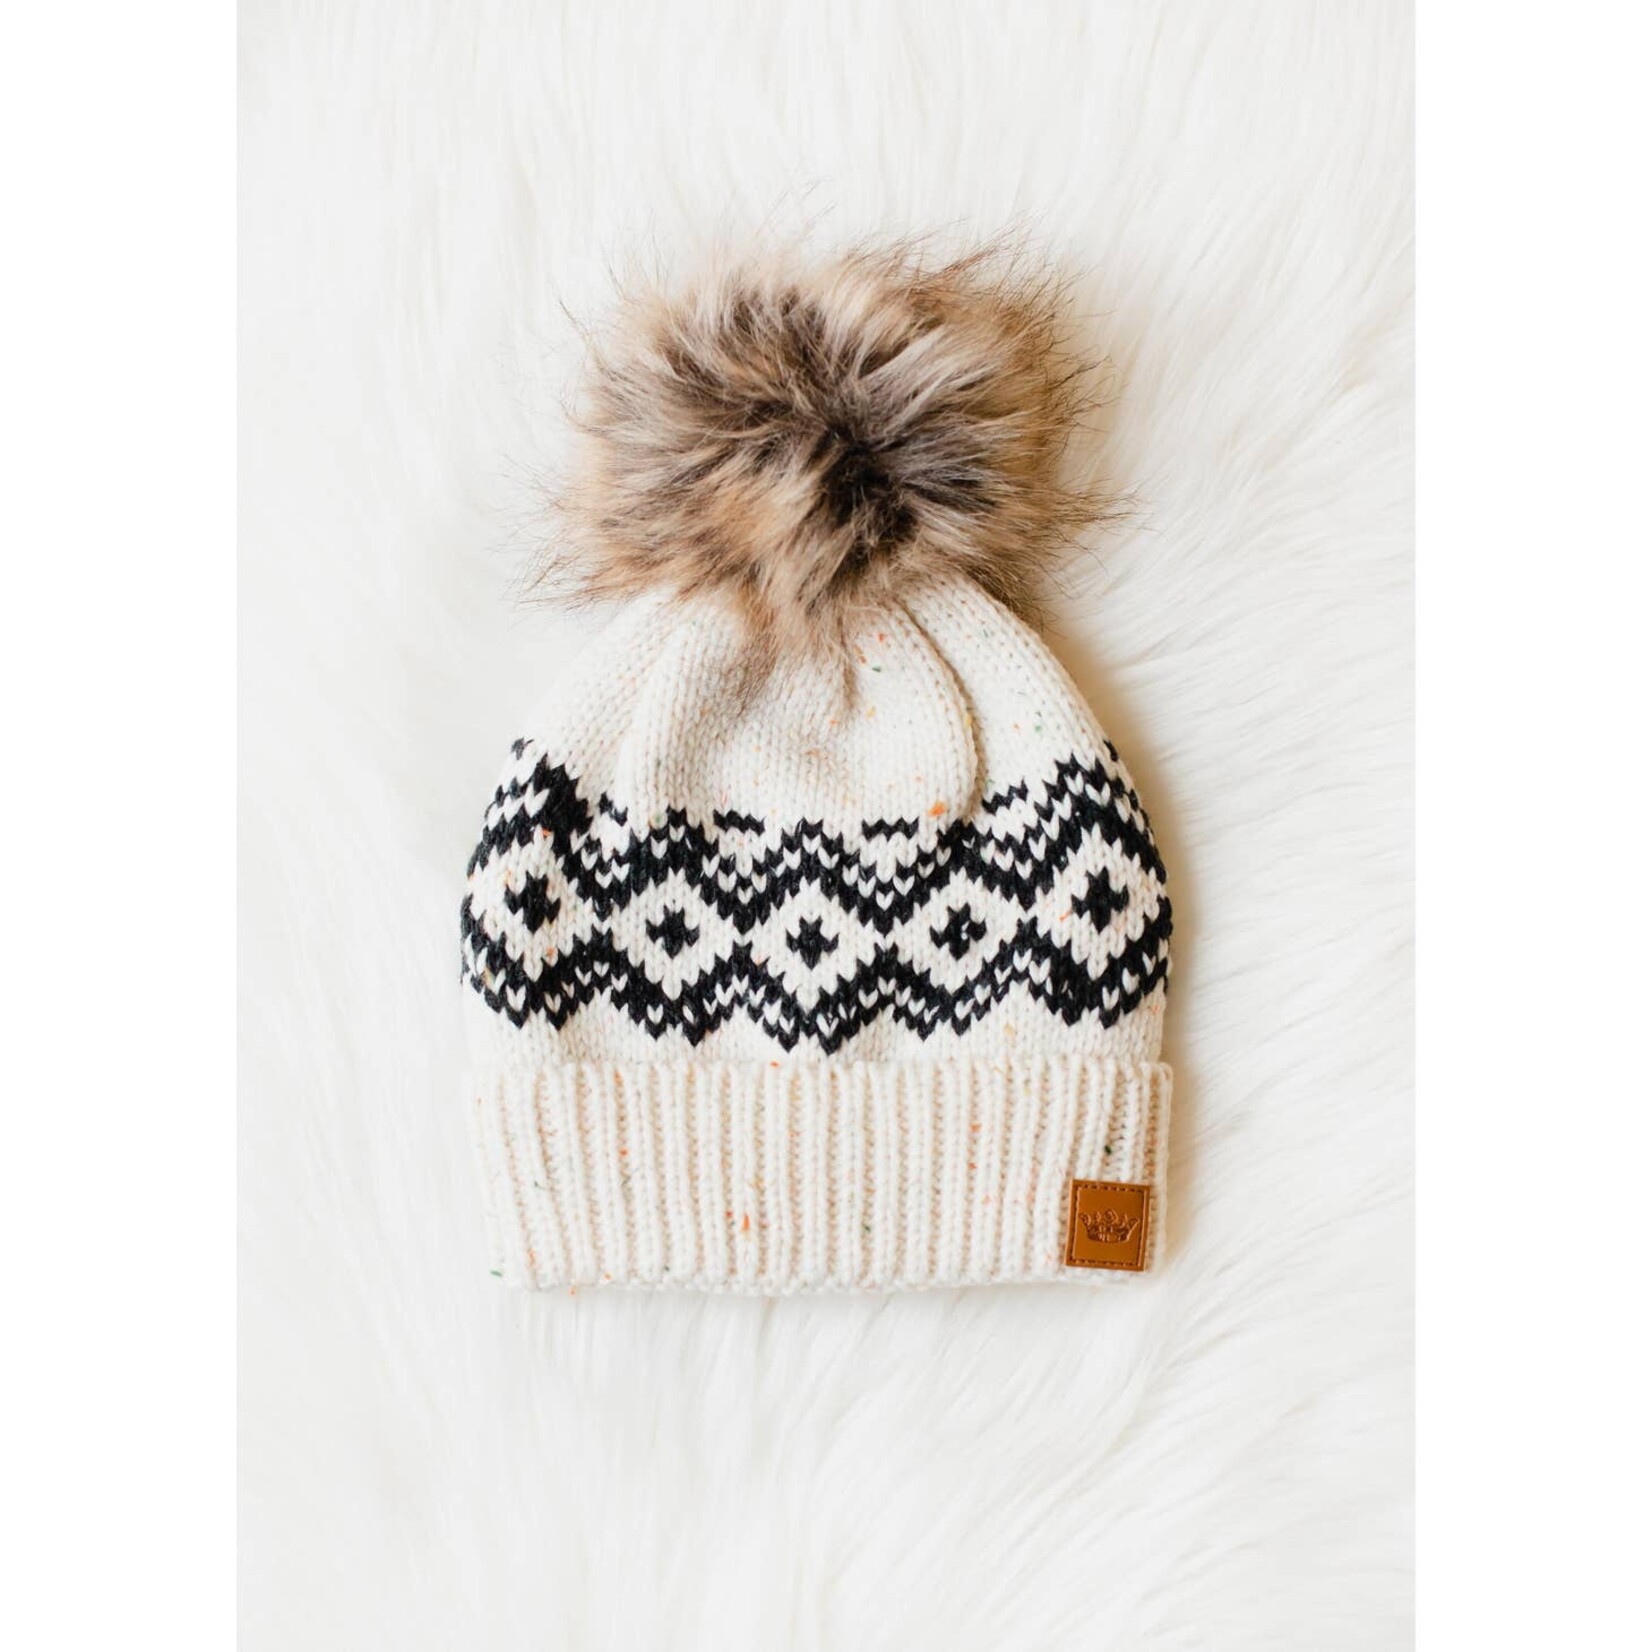 Panache Apparel Co. Cream & Charcoal Speckled Pattern Pom Hat